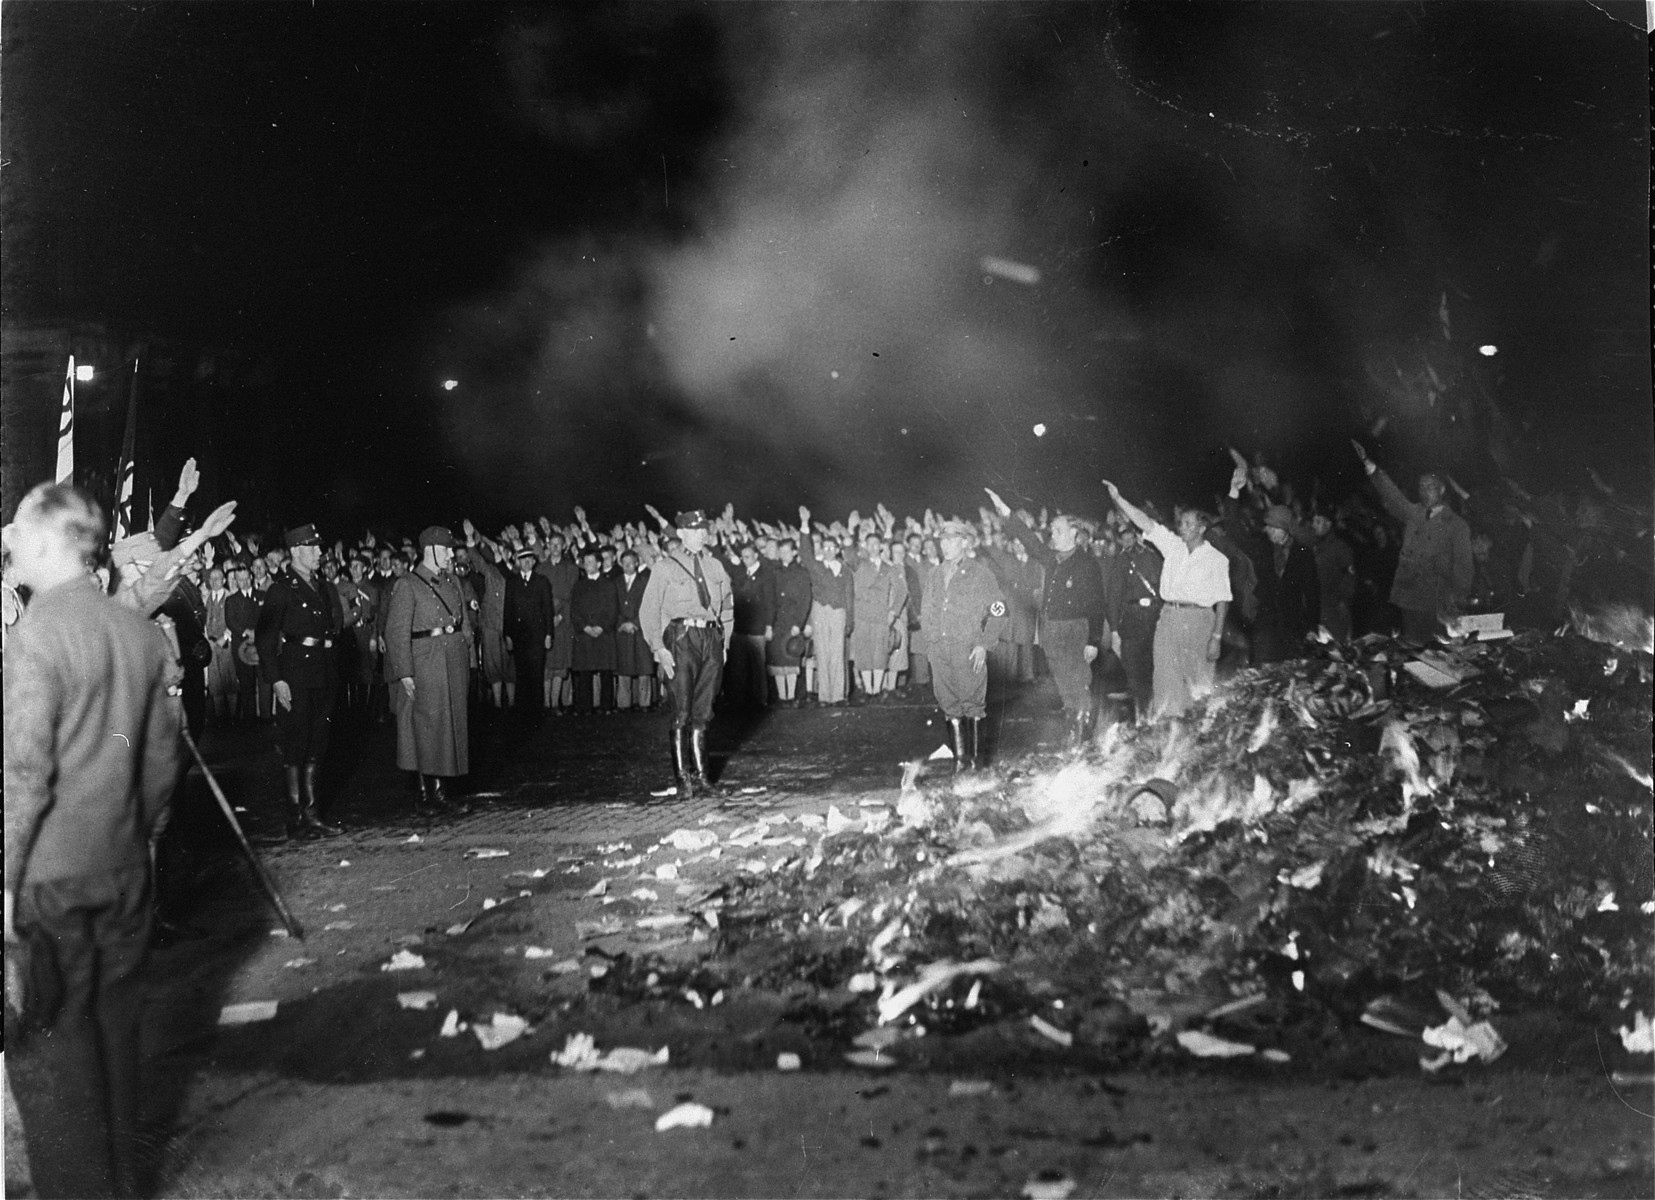 The public burning of "un-German" books by members of the SA and university students on the Opernplatz in Berlin.